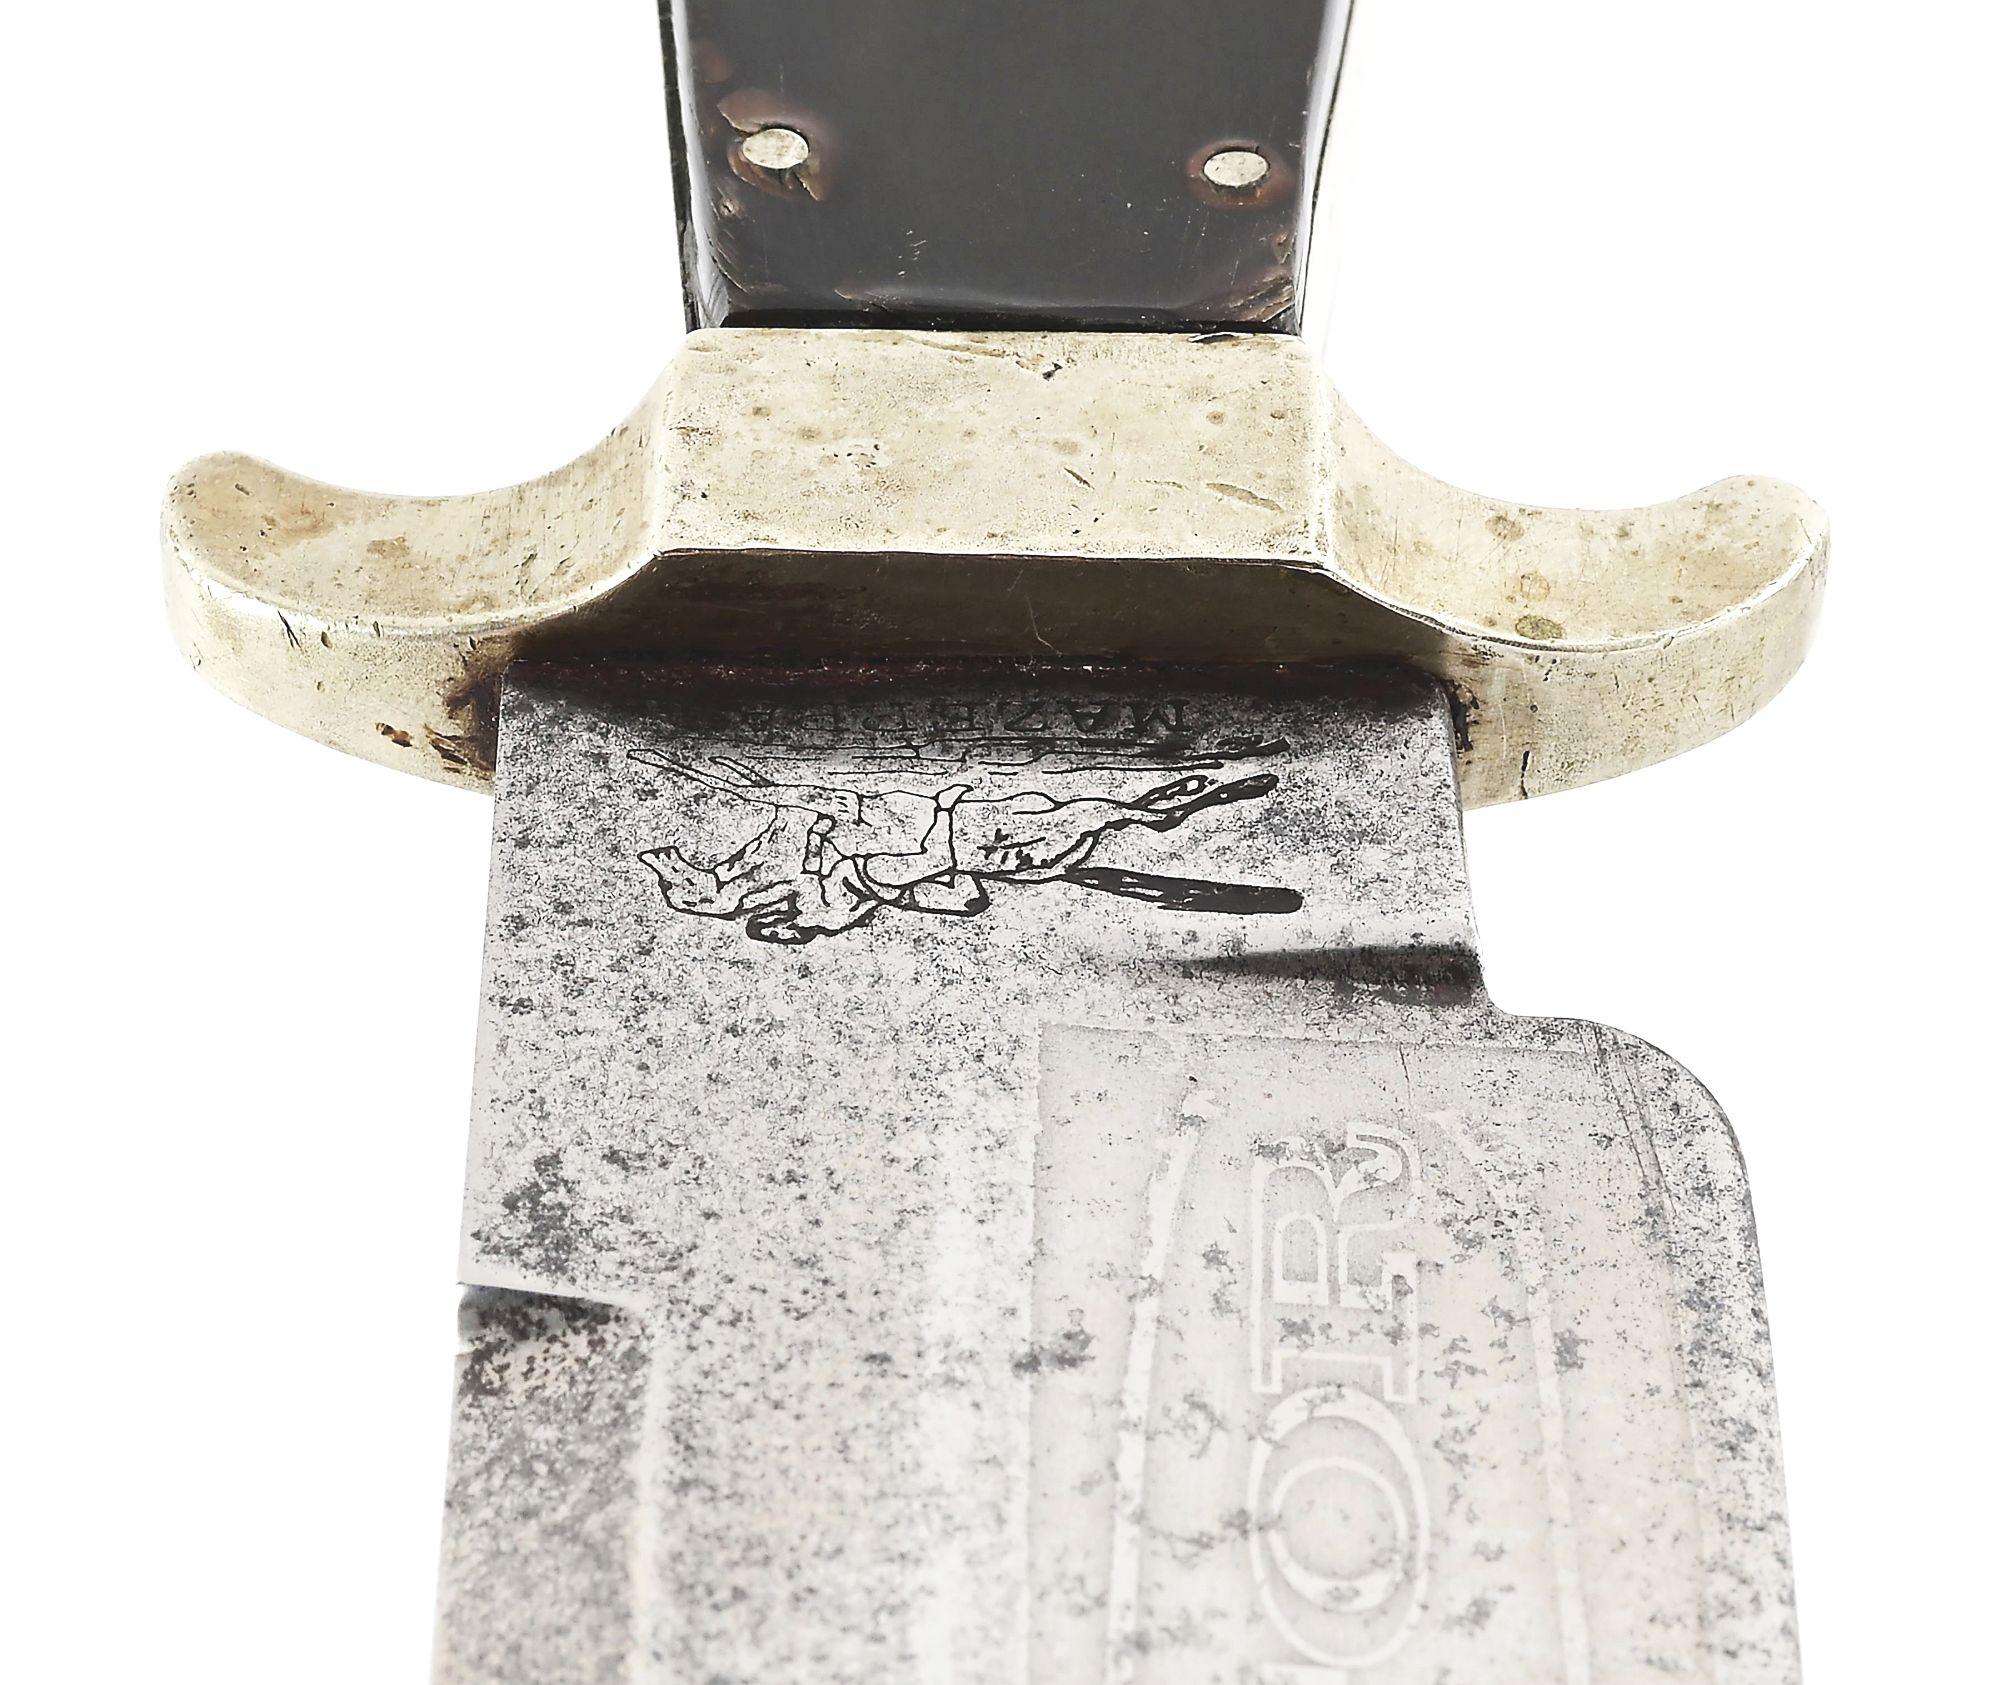 GOLD MINERS PROTECTOR BOWIE KNIFE BY SAMUEL HANCOCK.